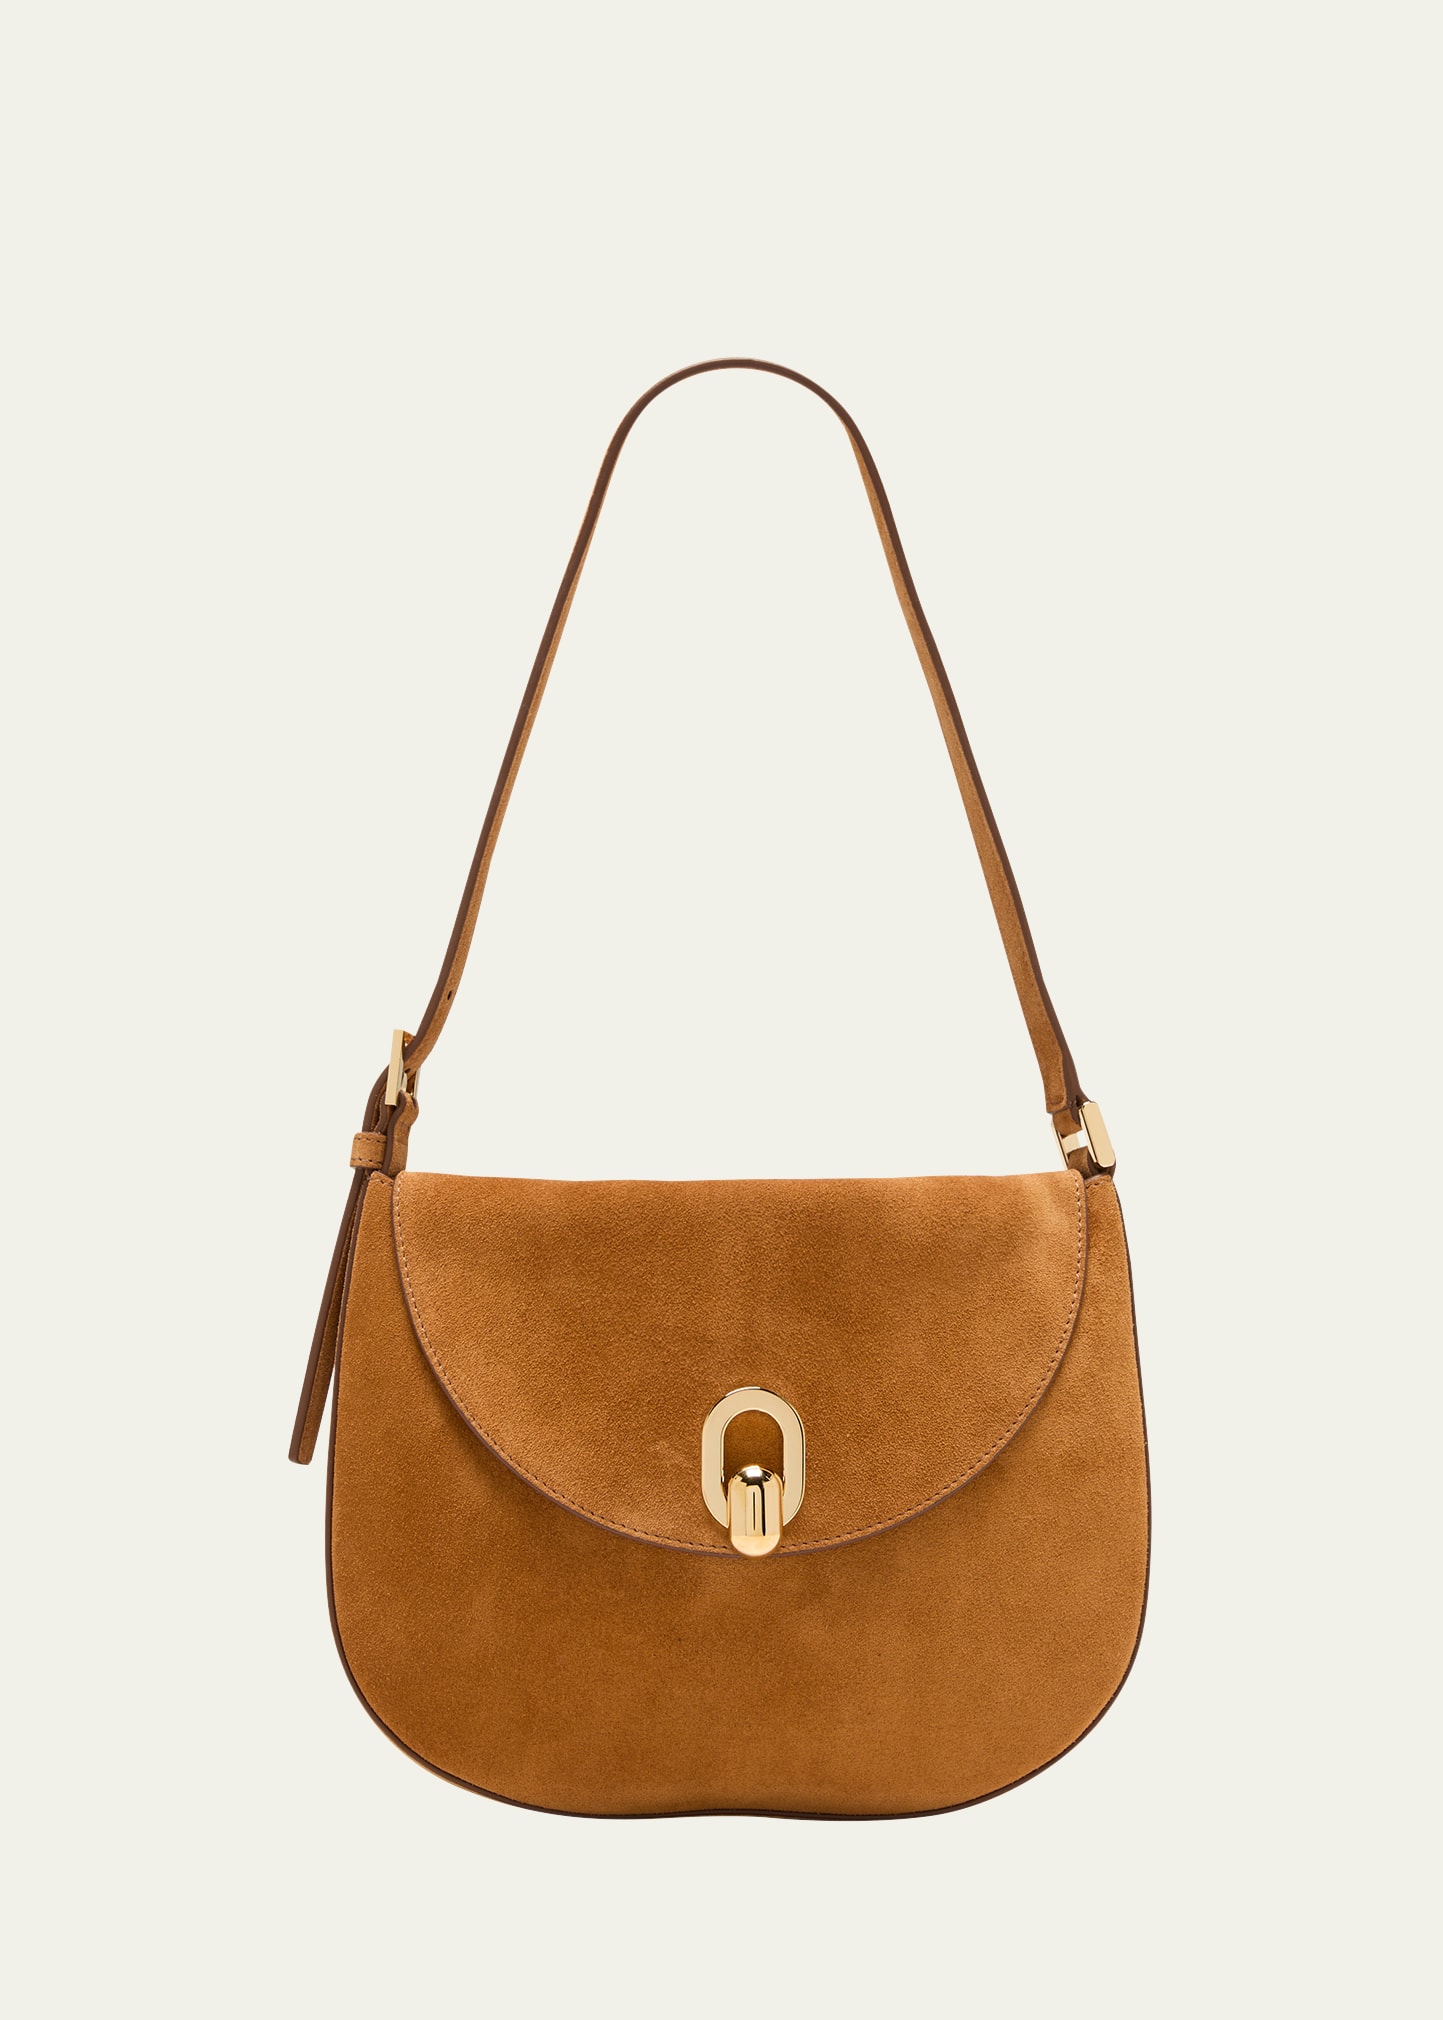 Savette The Tondo Suede Hobo Bag In Saddle